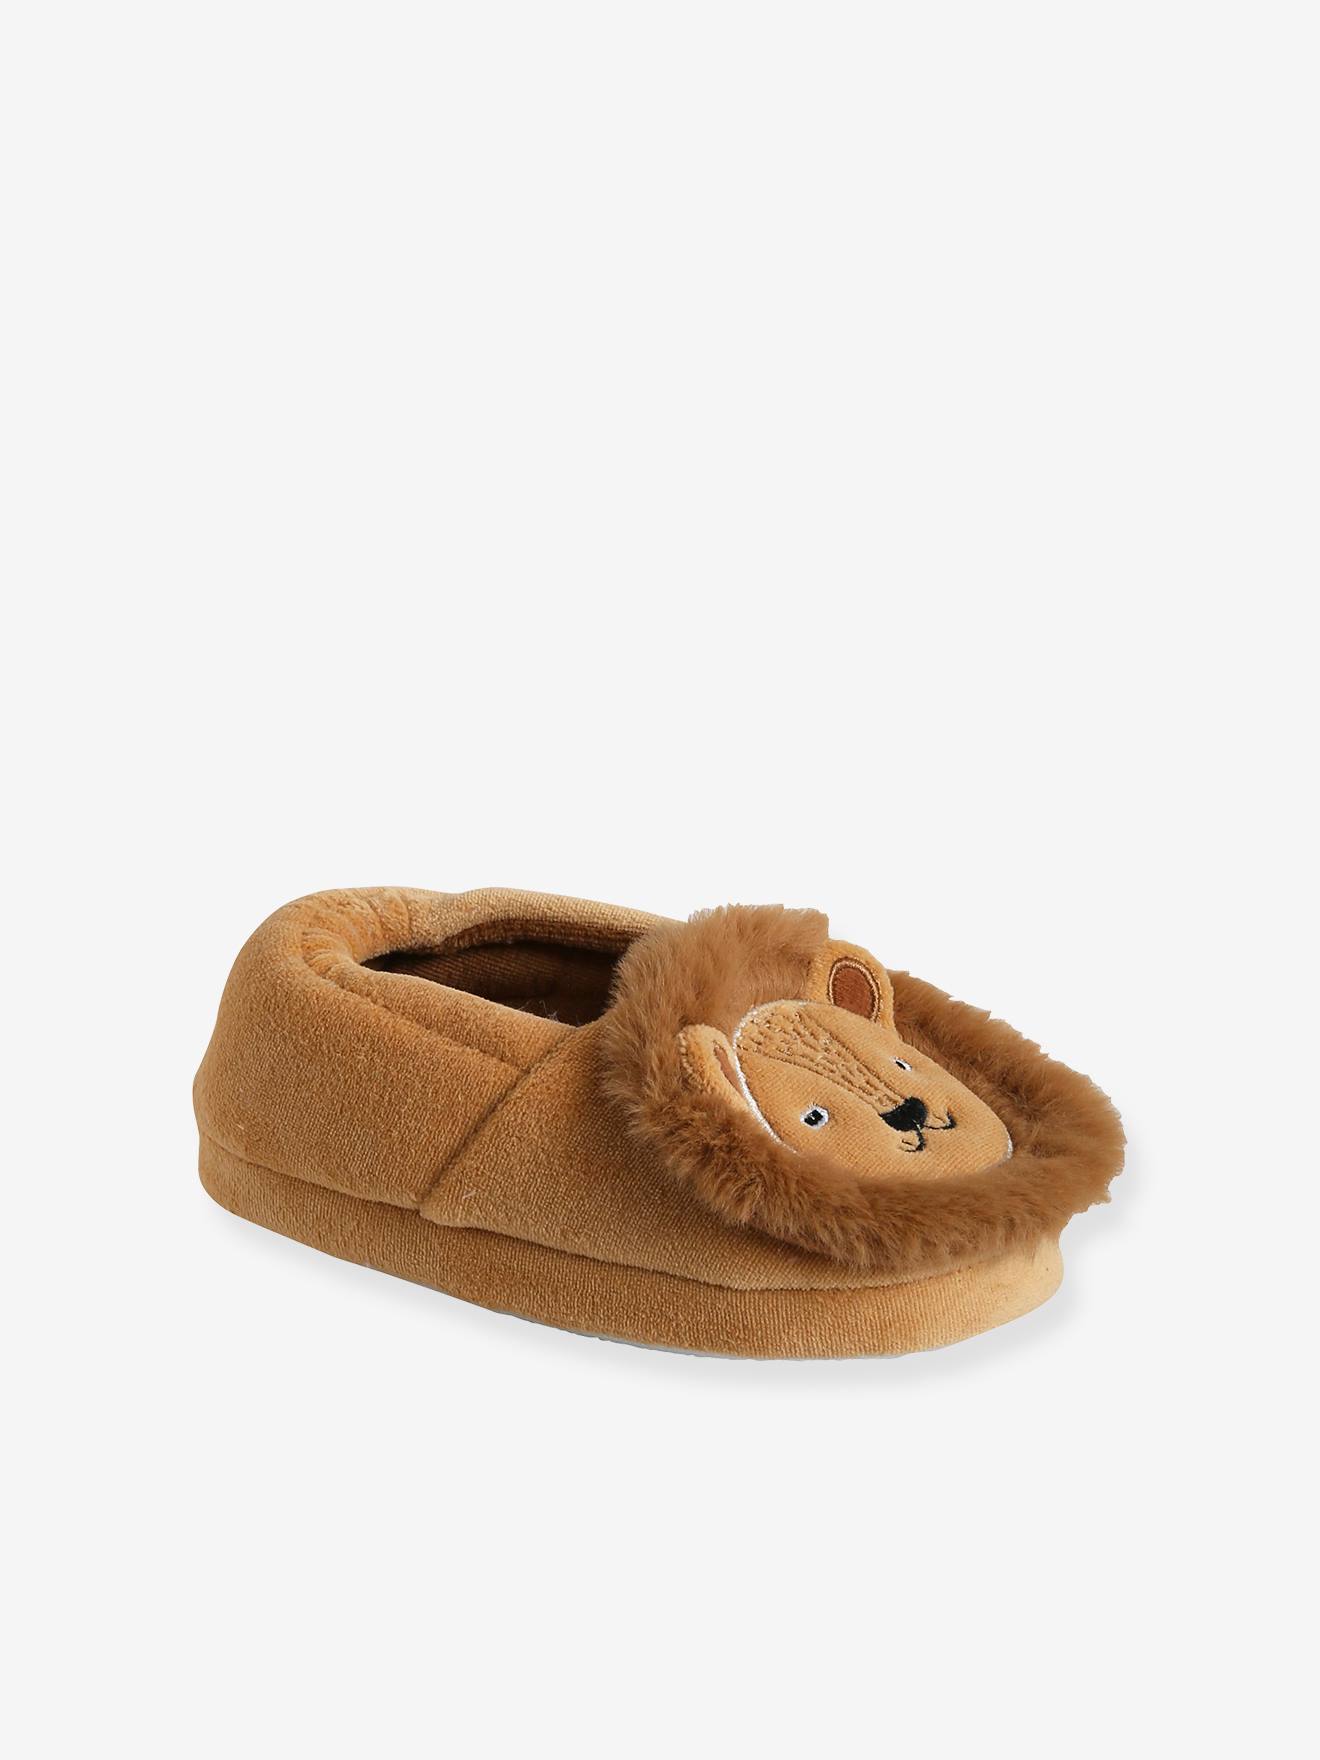 Lion Slippers with Interior for - cappuccino, Shoes